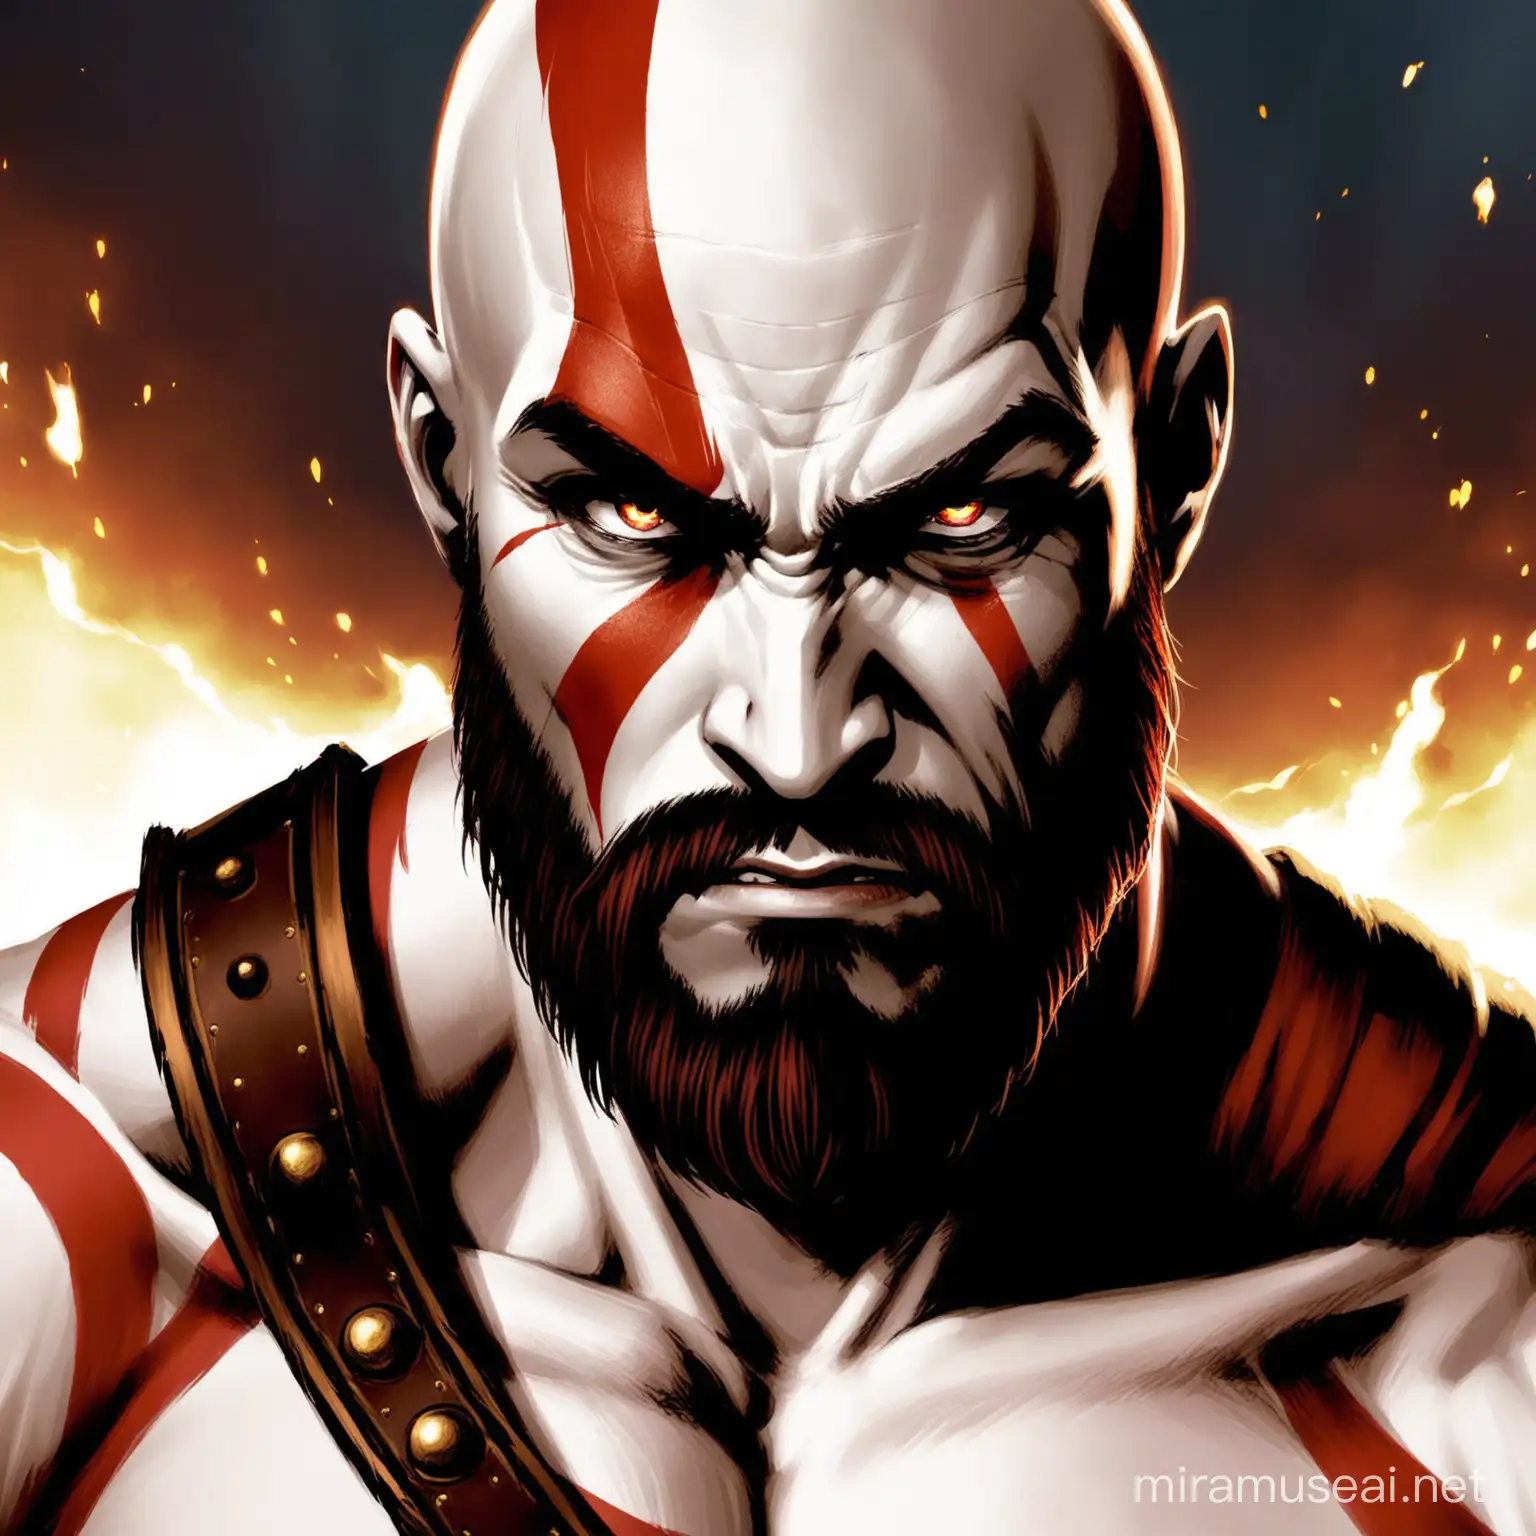 Kratos the Stoic Warrior from God of War 2005 Facing the Viewer